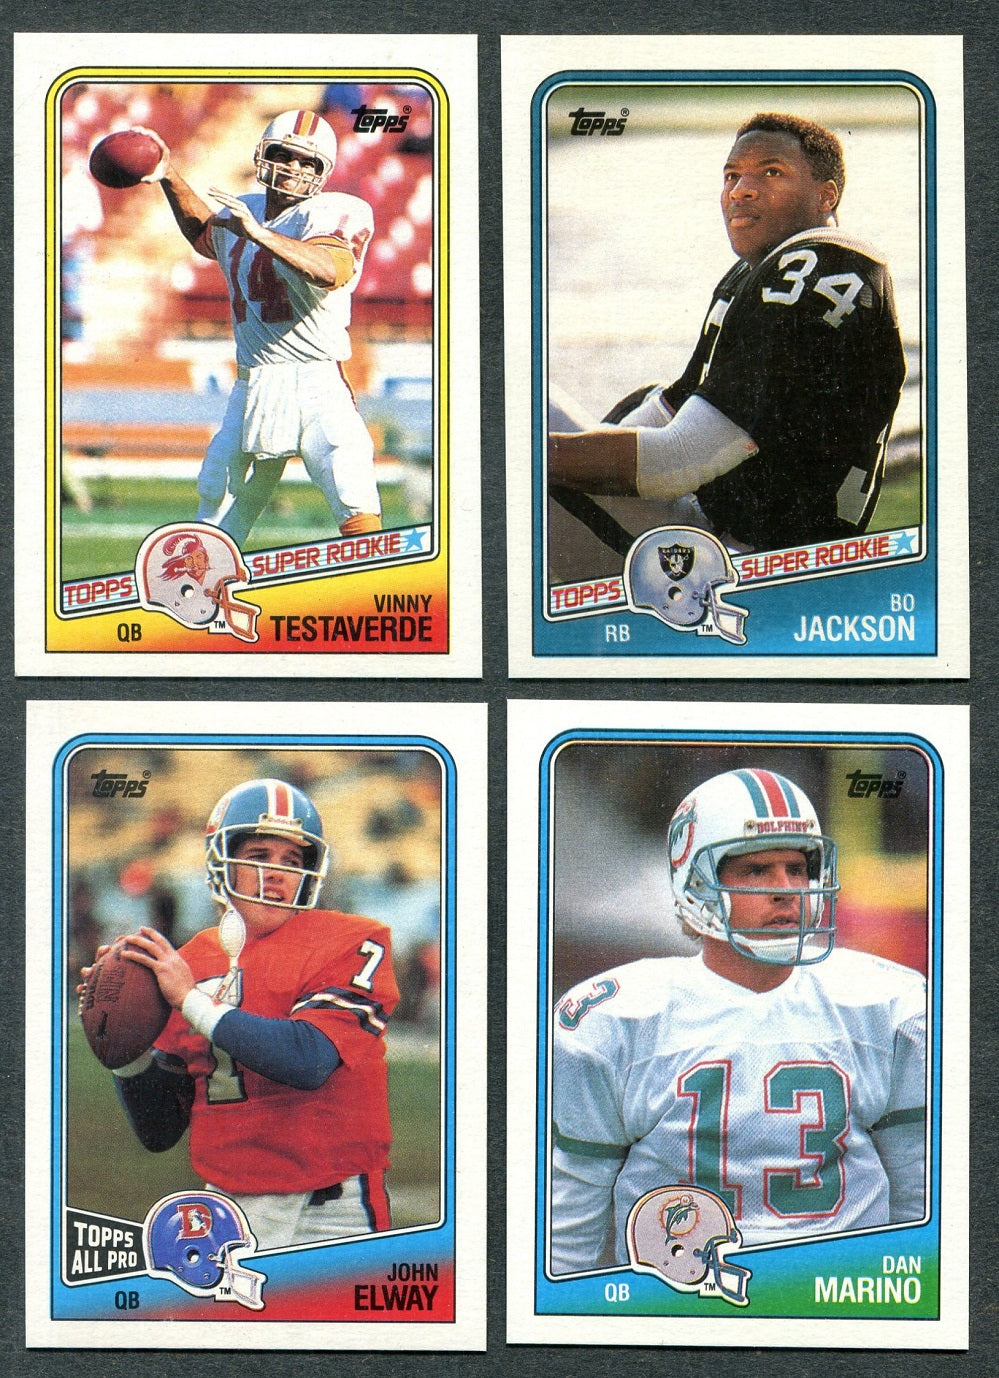 1988 Topps Football Complete Set NM/MT (396) (24-331)